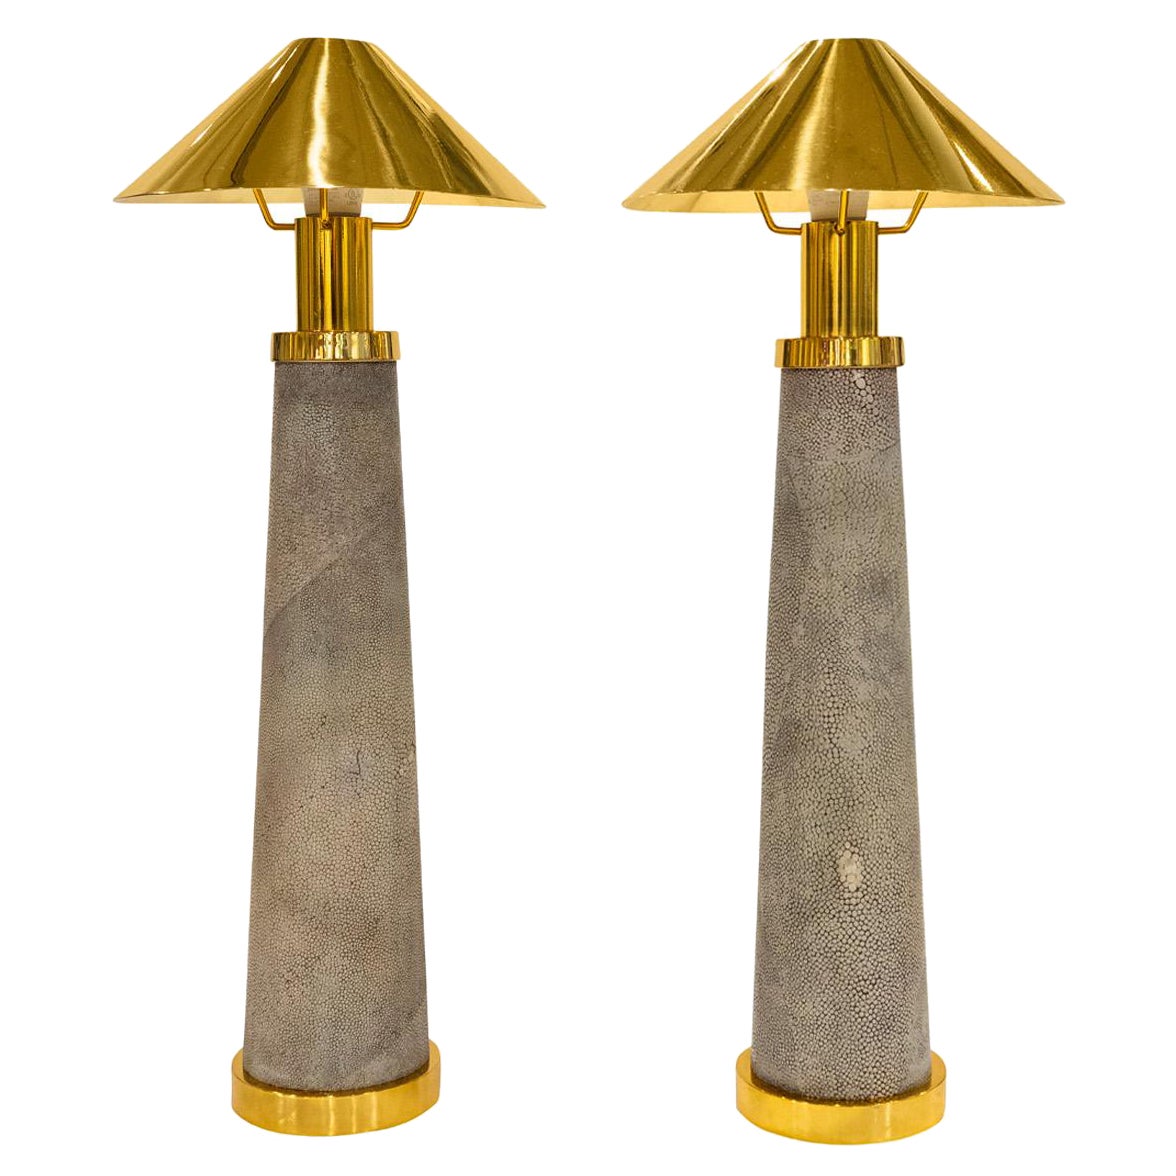 Karl Springer Rare Pair of "Lighthouse Lamps" in Shagreen and Brass 1980s For Sale